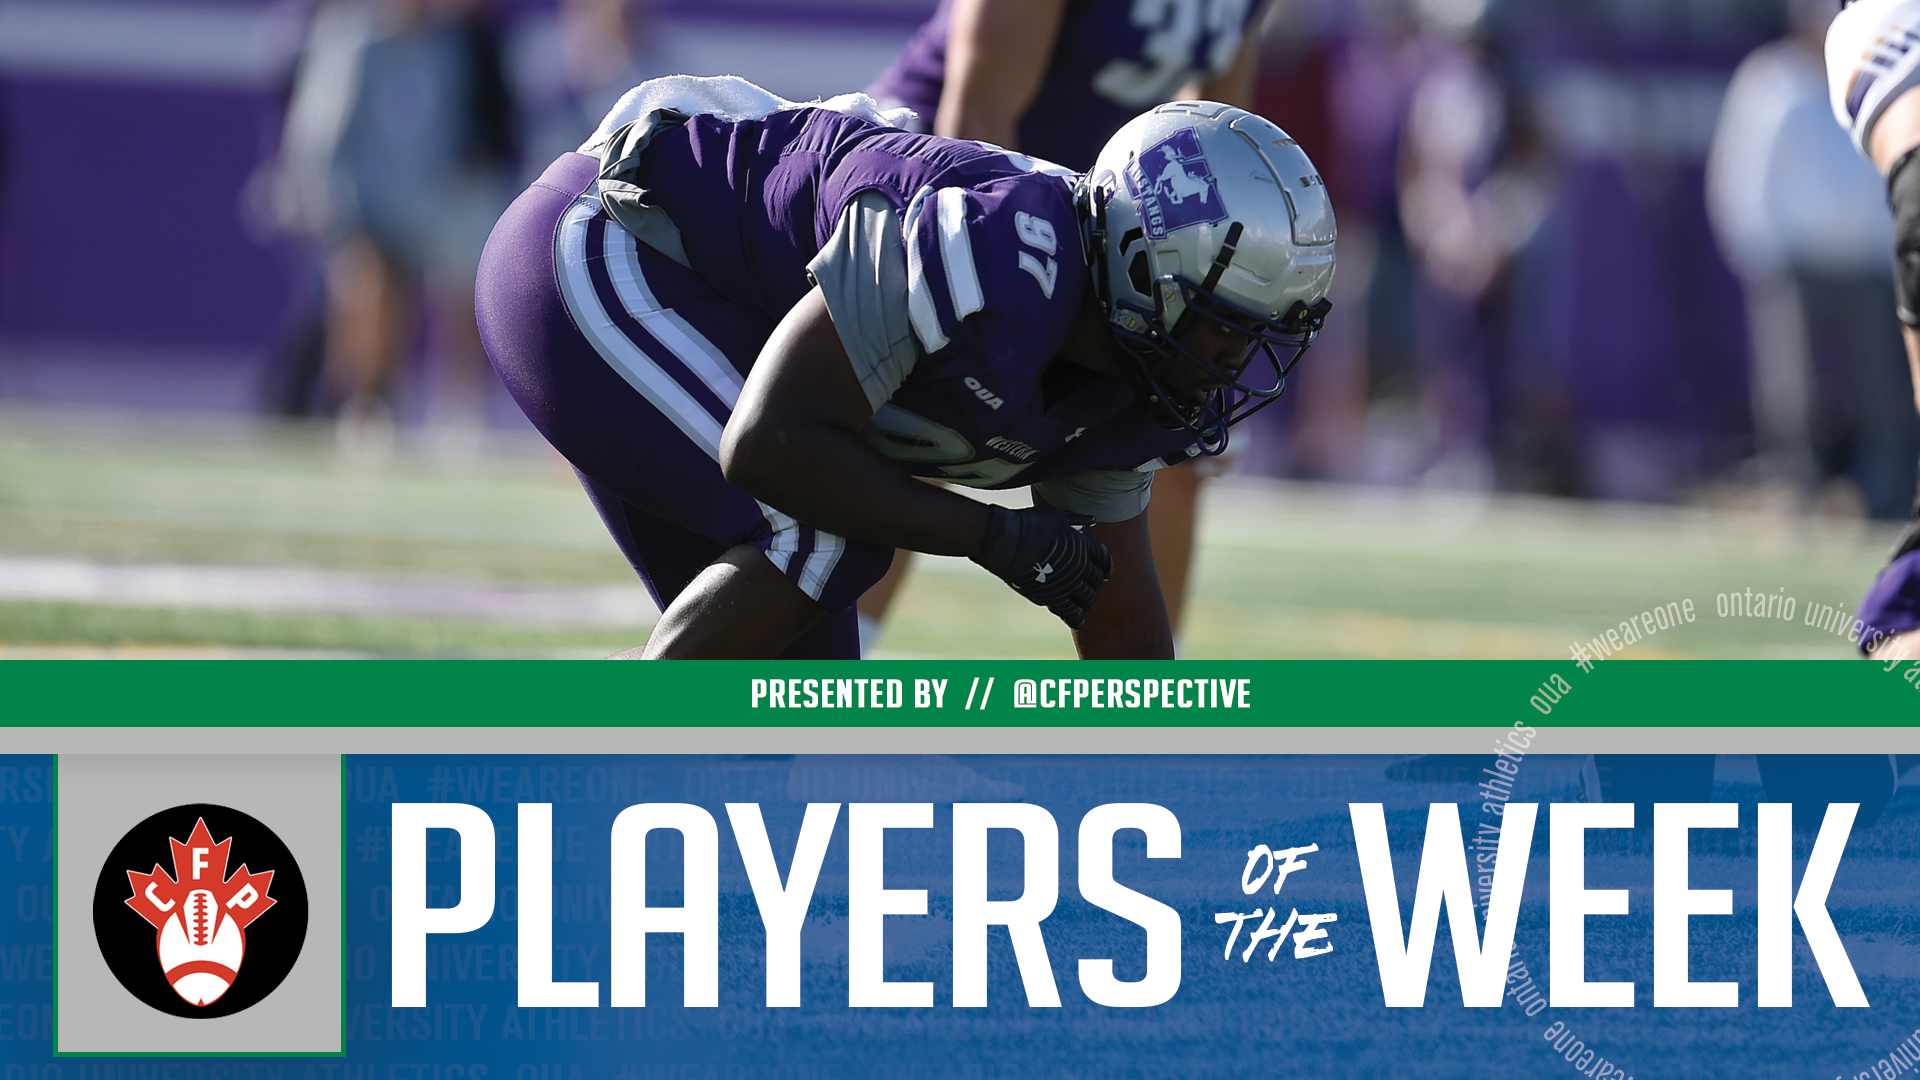 Edwards, Hinds, Burton named OUA football players of the week